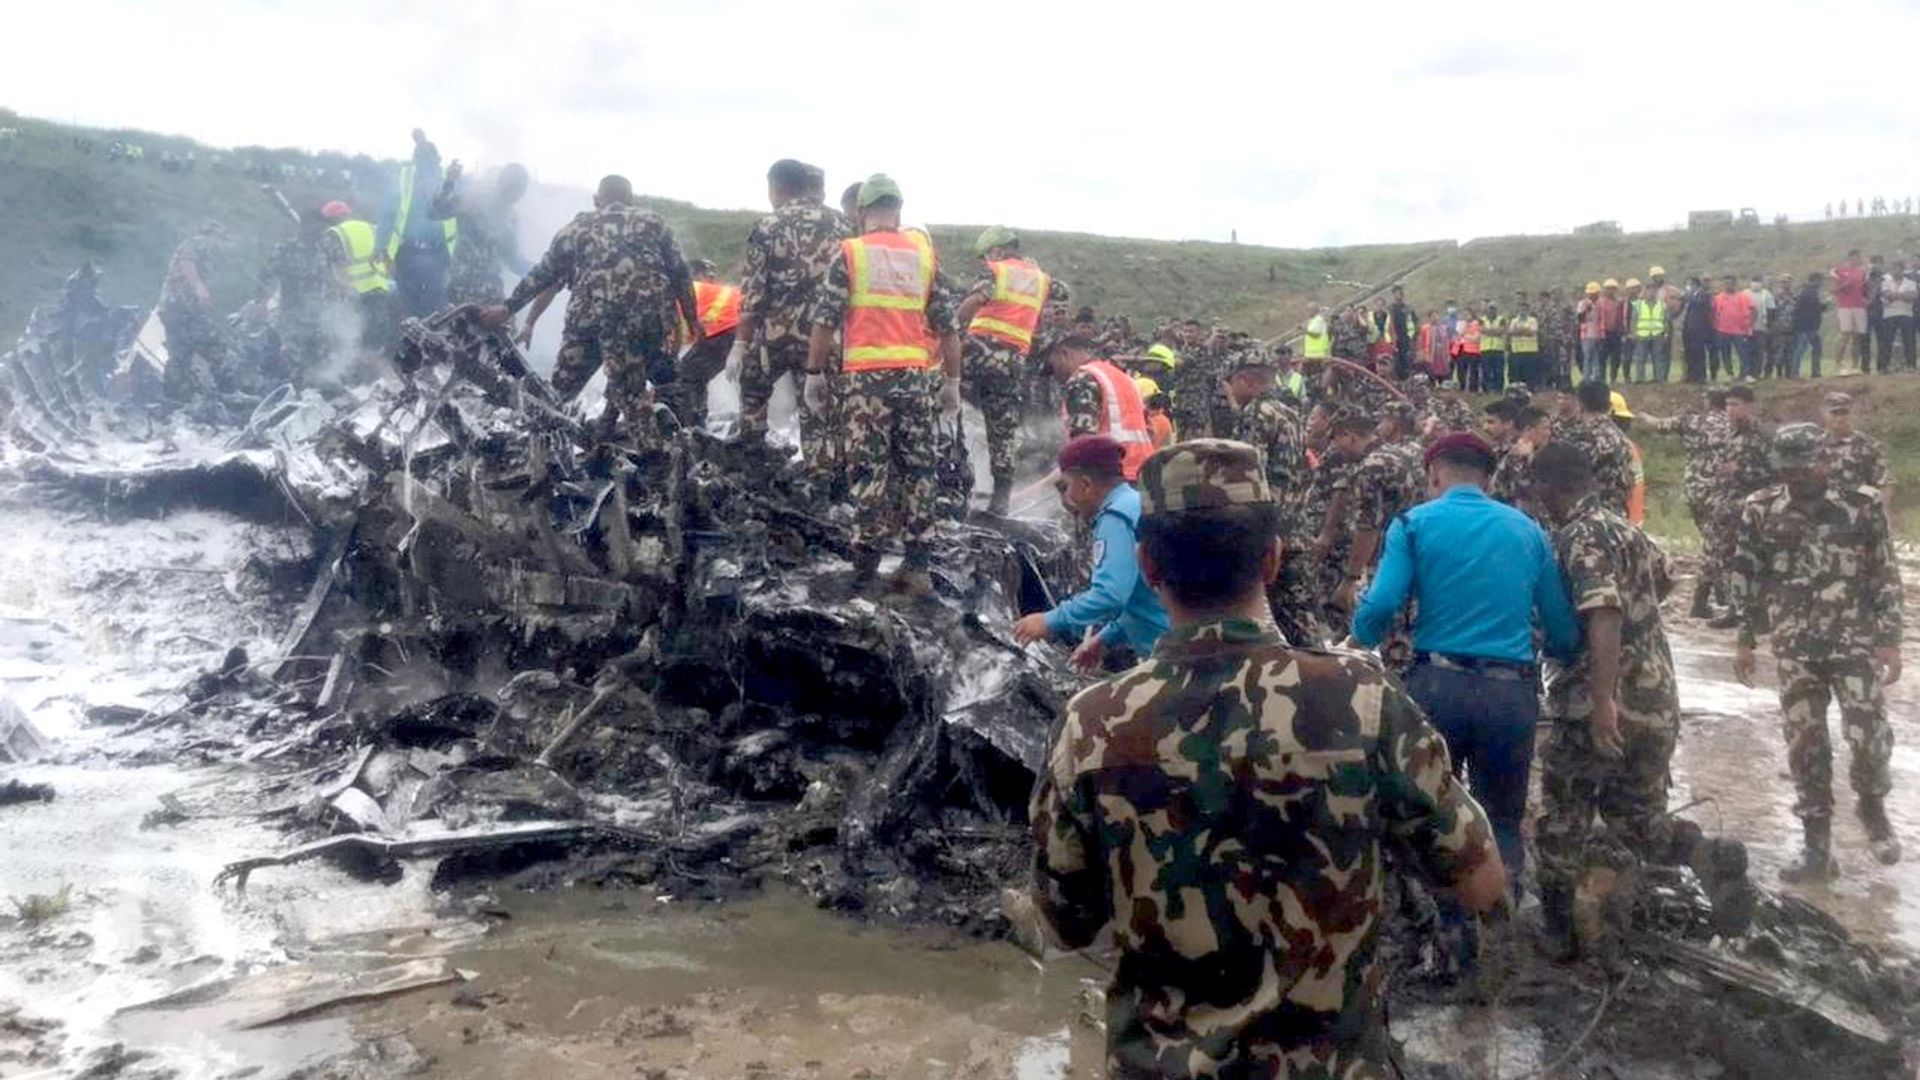 Pilot is sole survivor after plane crashes in Nepal shortly after takeoff